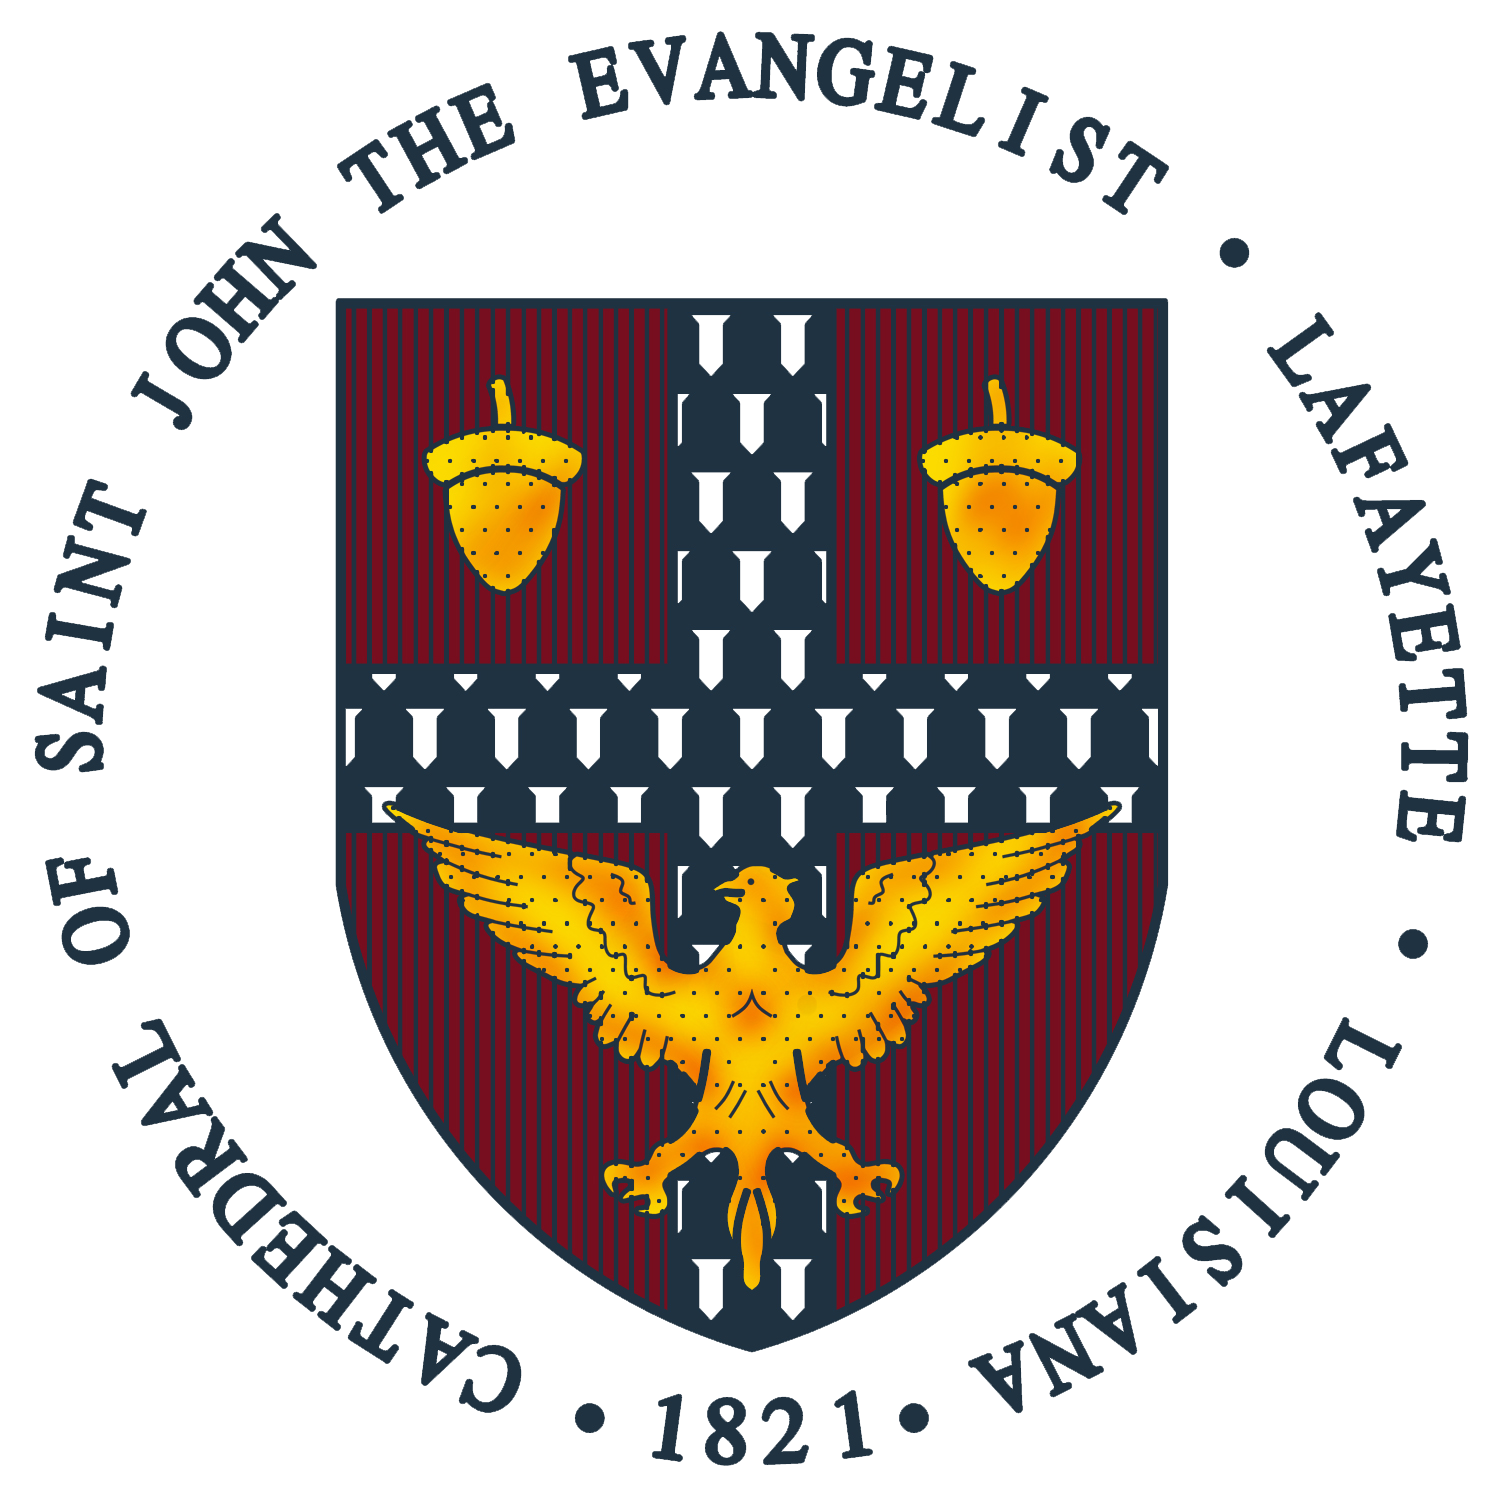 Cathedral logo